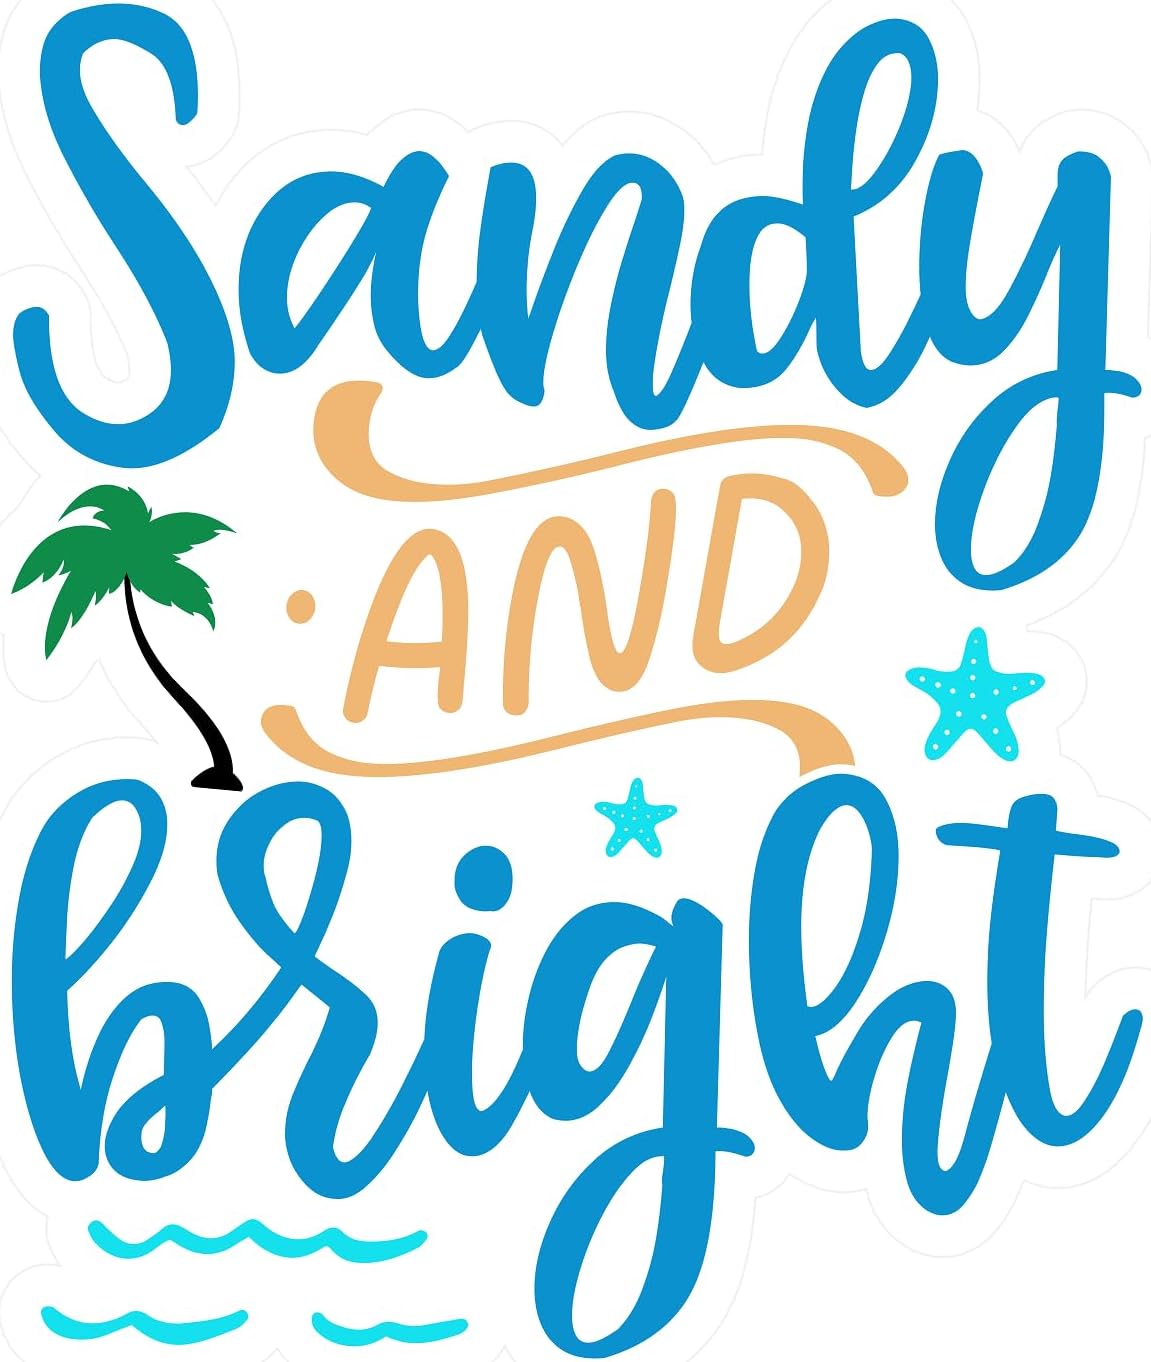 Inspirational Quote "Sandy and Bright" Motivational Sticker Vinyl Decal Motivation Stickers- 5" Vinyl Sticker Waterproof